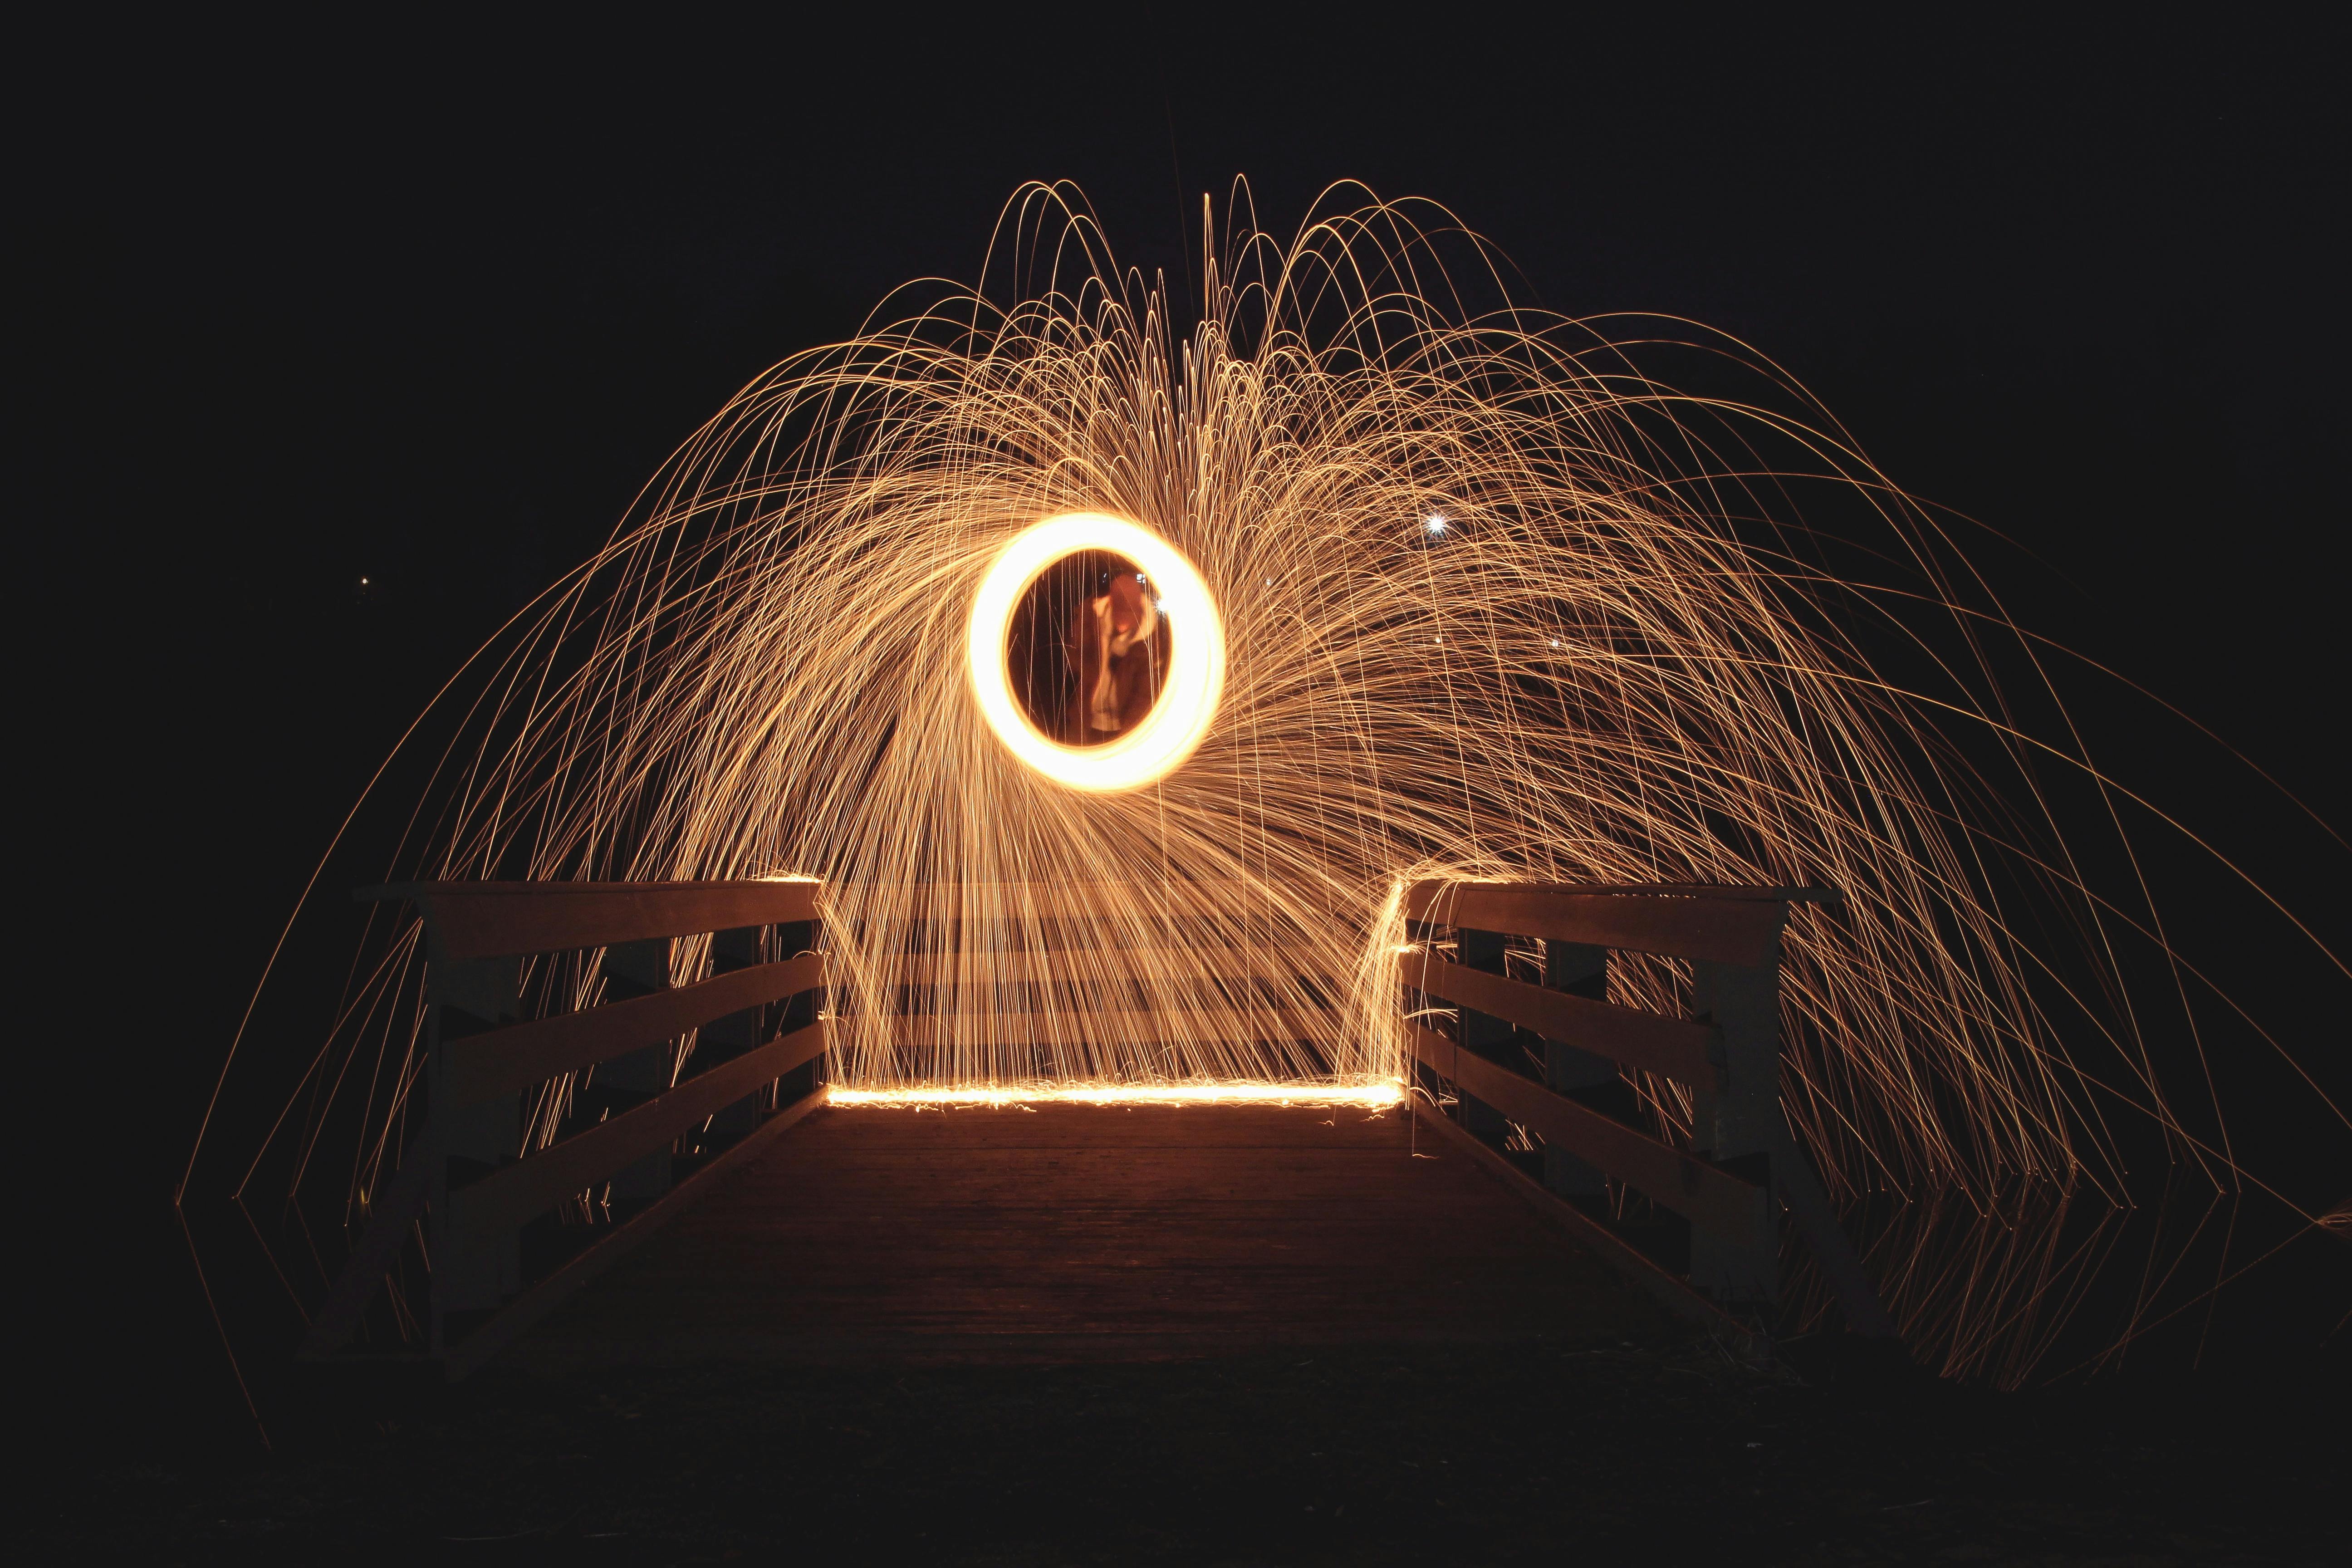 Free stock photo of steel wool photography